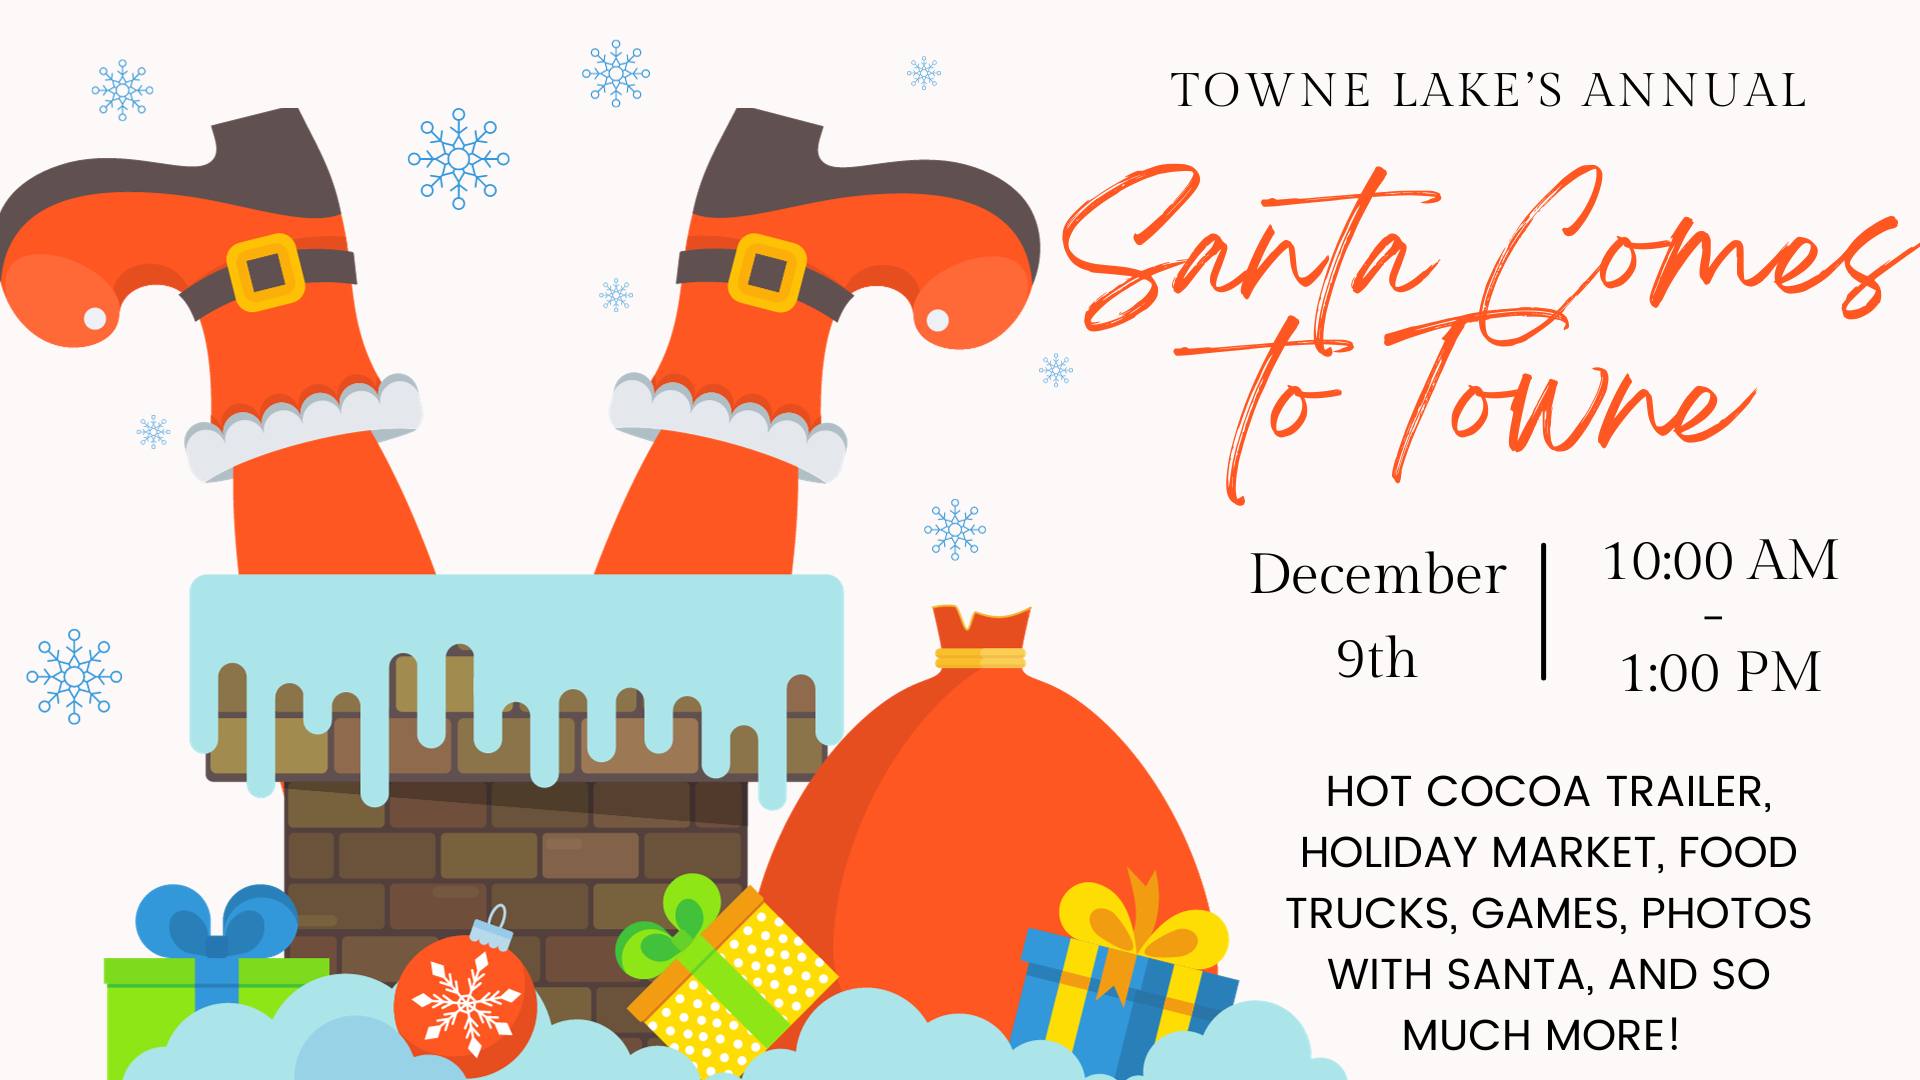 Don't Miss Santa Comes to Towne